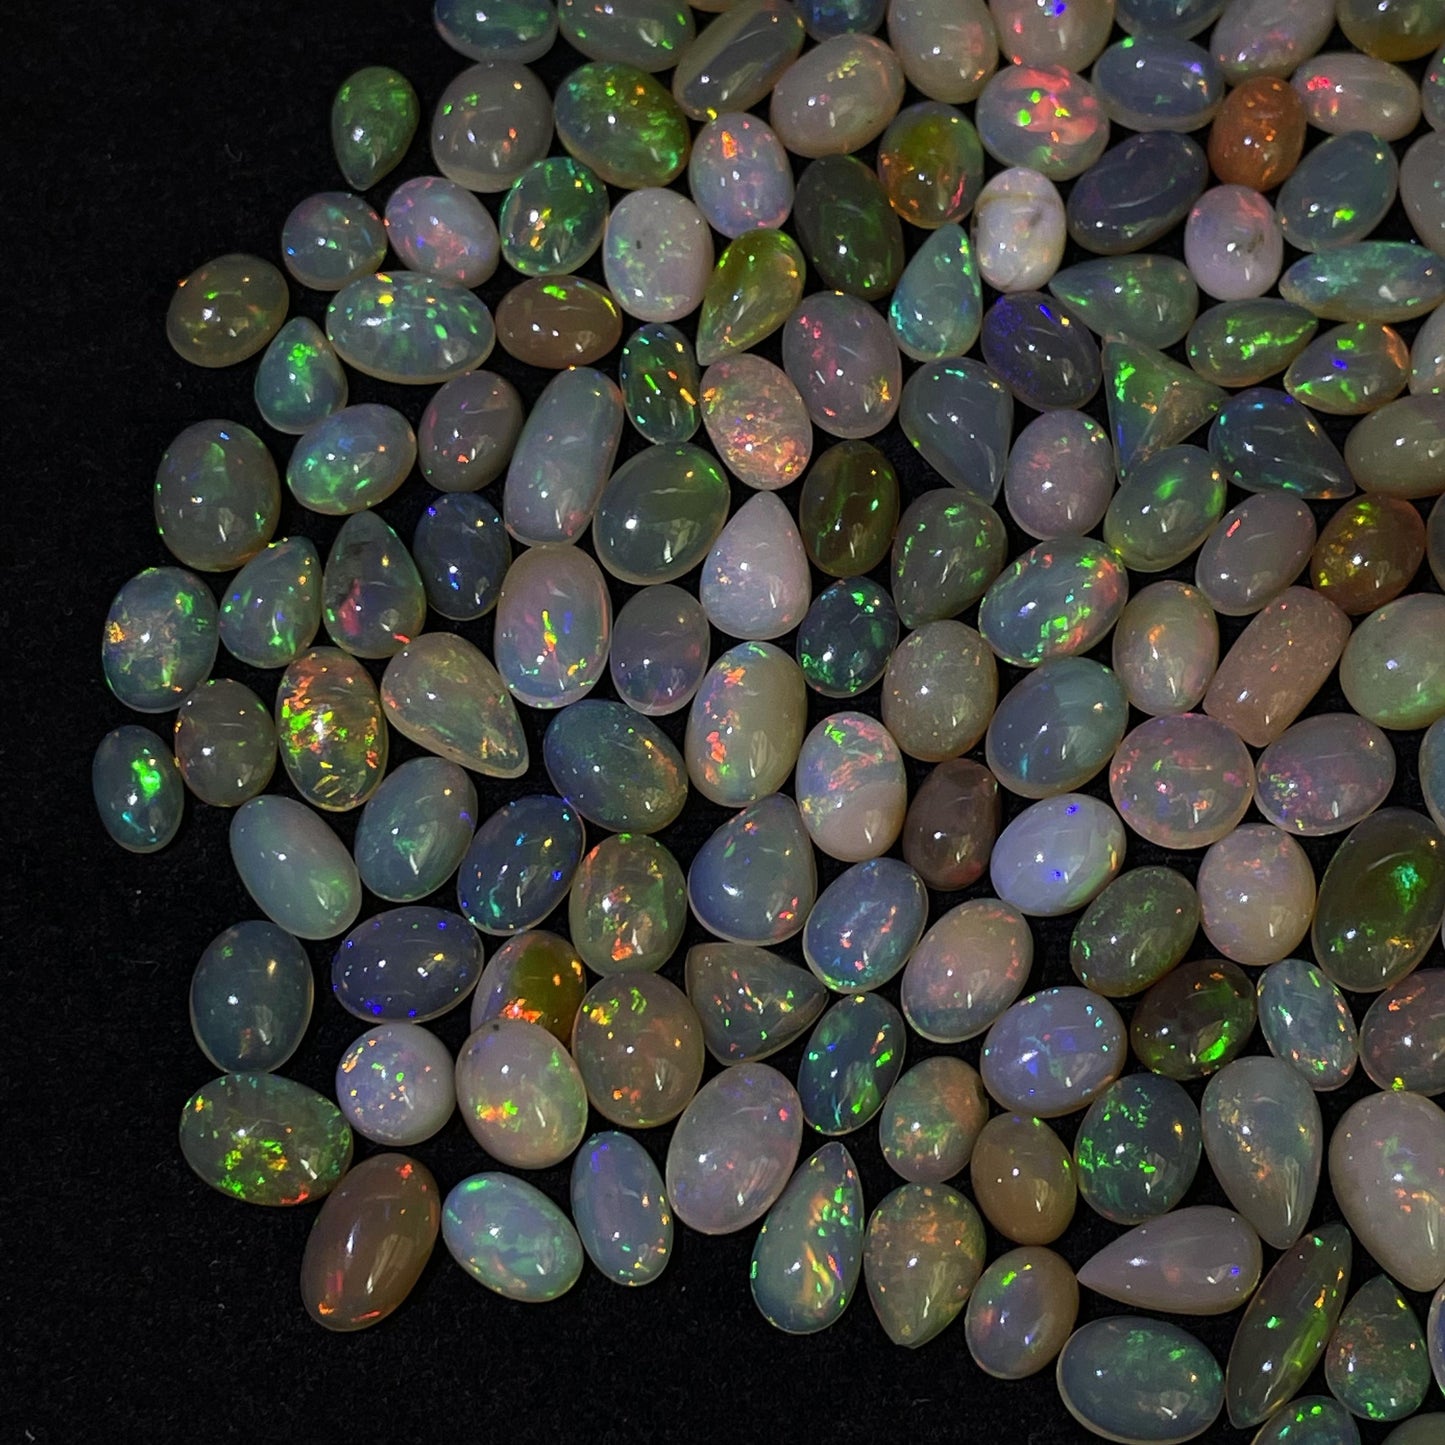 Exquisite Natural Ethiopian Opal Cabochon: Sparkling Beauty in 1.2 cts